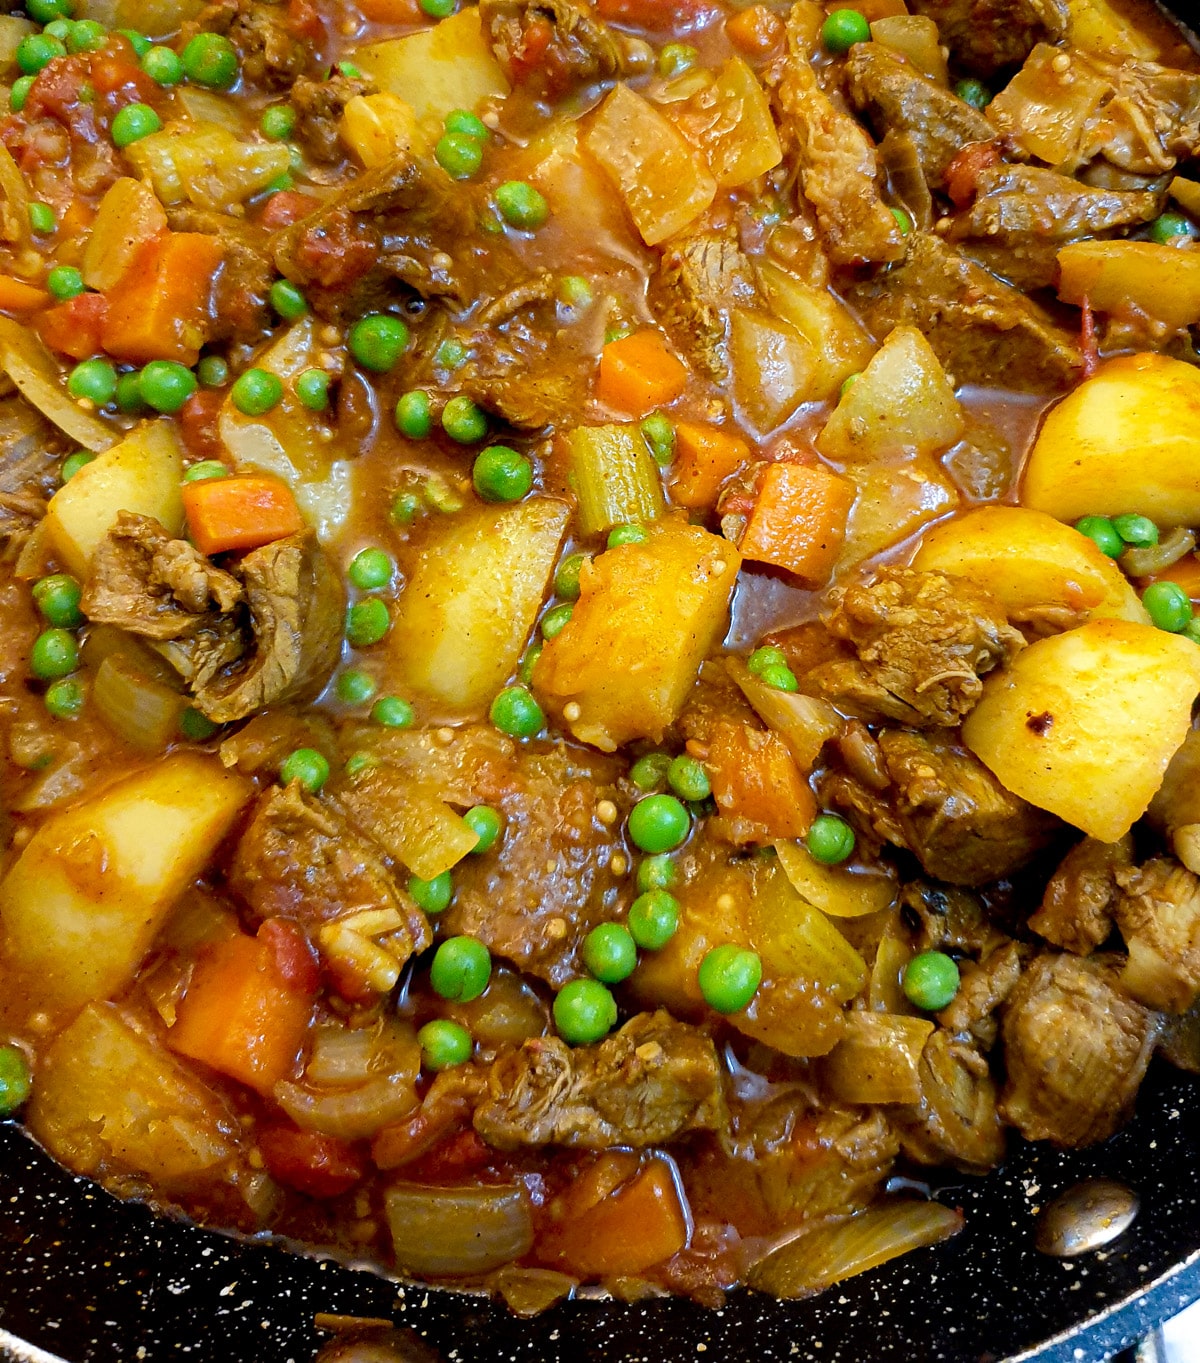 Close up of leftover lamb curry with potatoes, peas and other vegetables.